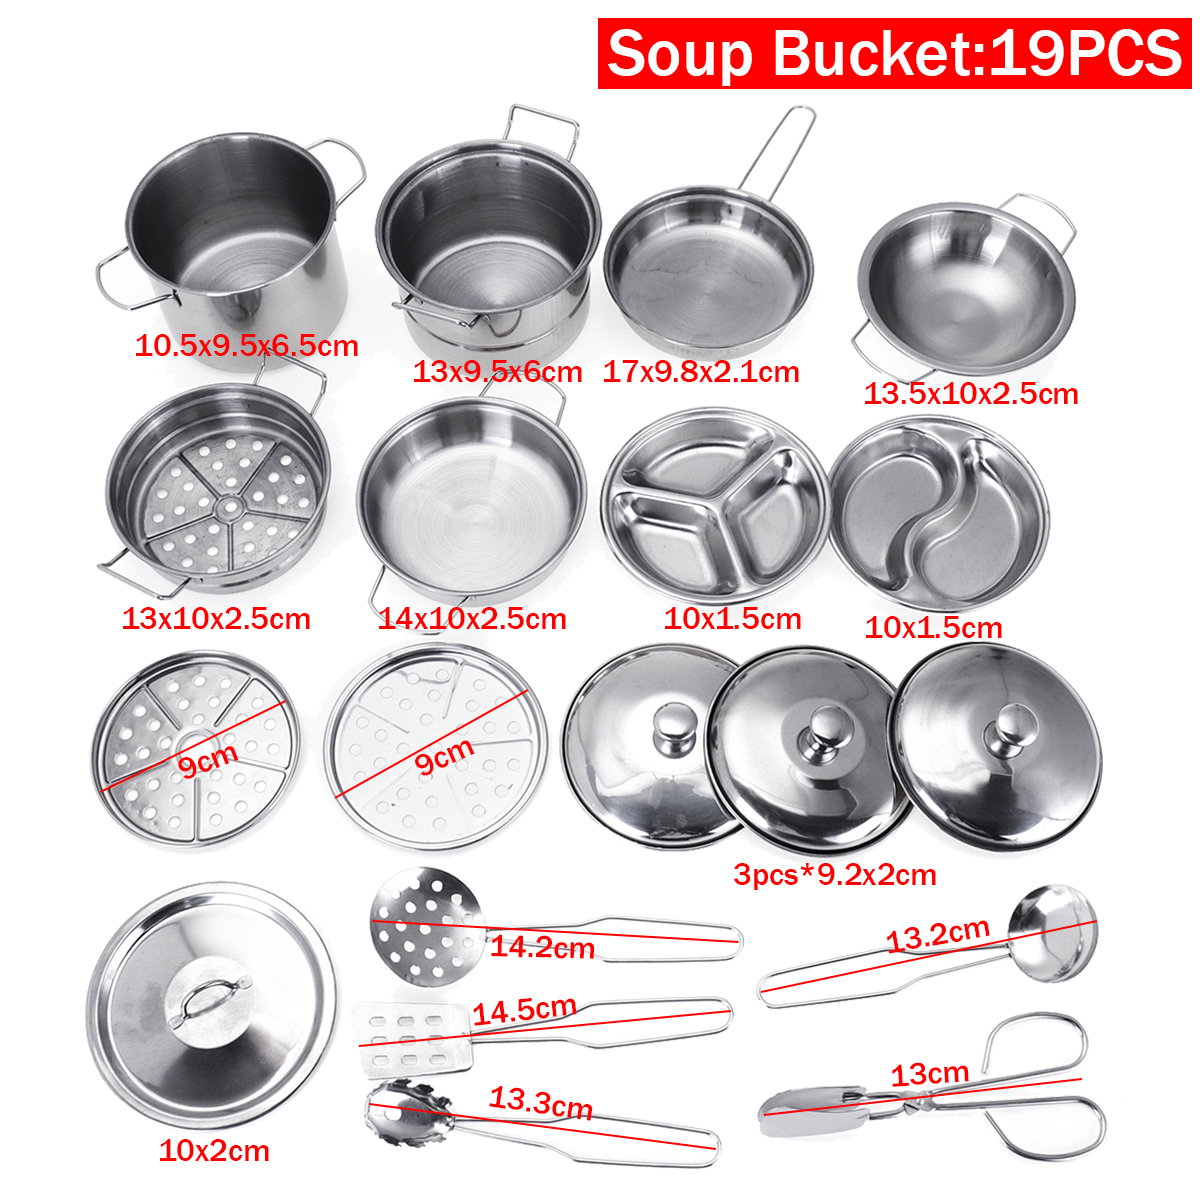 32PCS-Mini-Stainless-Steel-Kitchen-Cutlery-Play-House-Food-Toy-Boiler-Kettle-Cup-Bowl-Spoon-Cookware-1423237-3